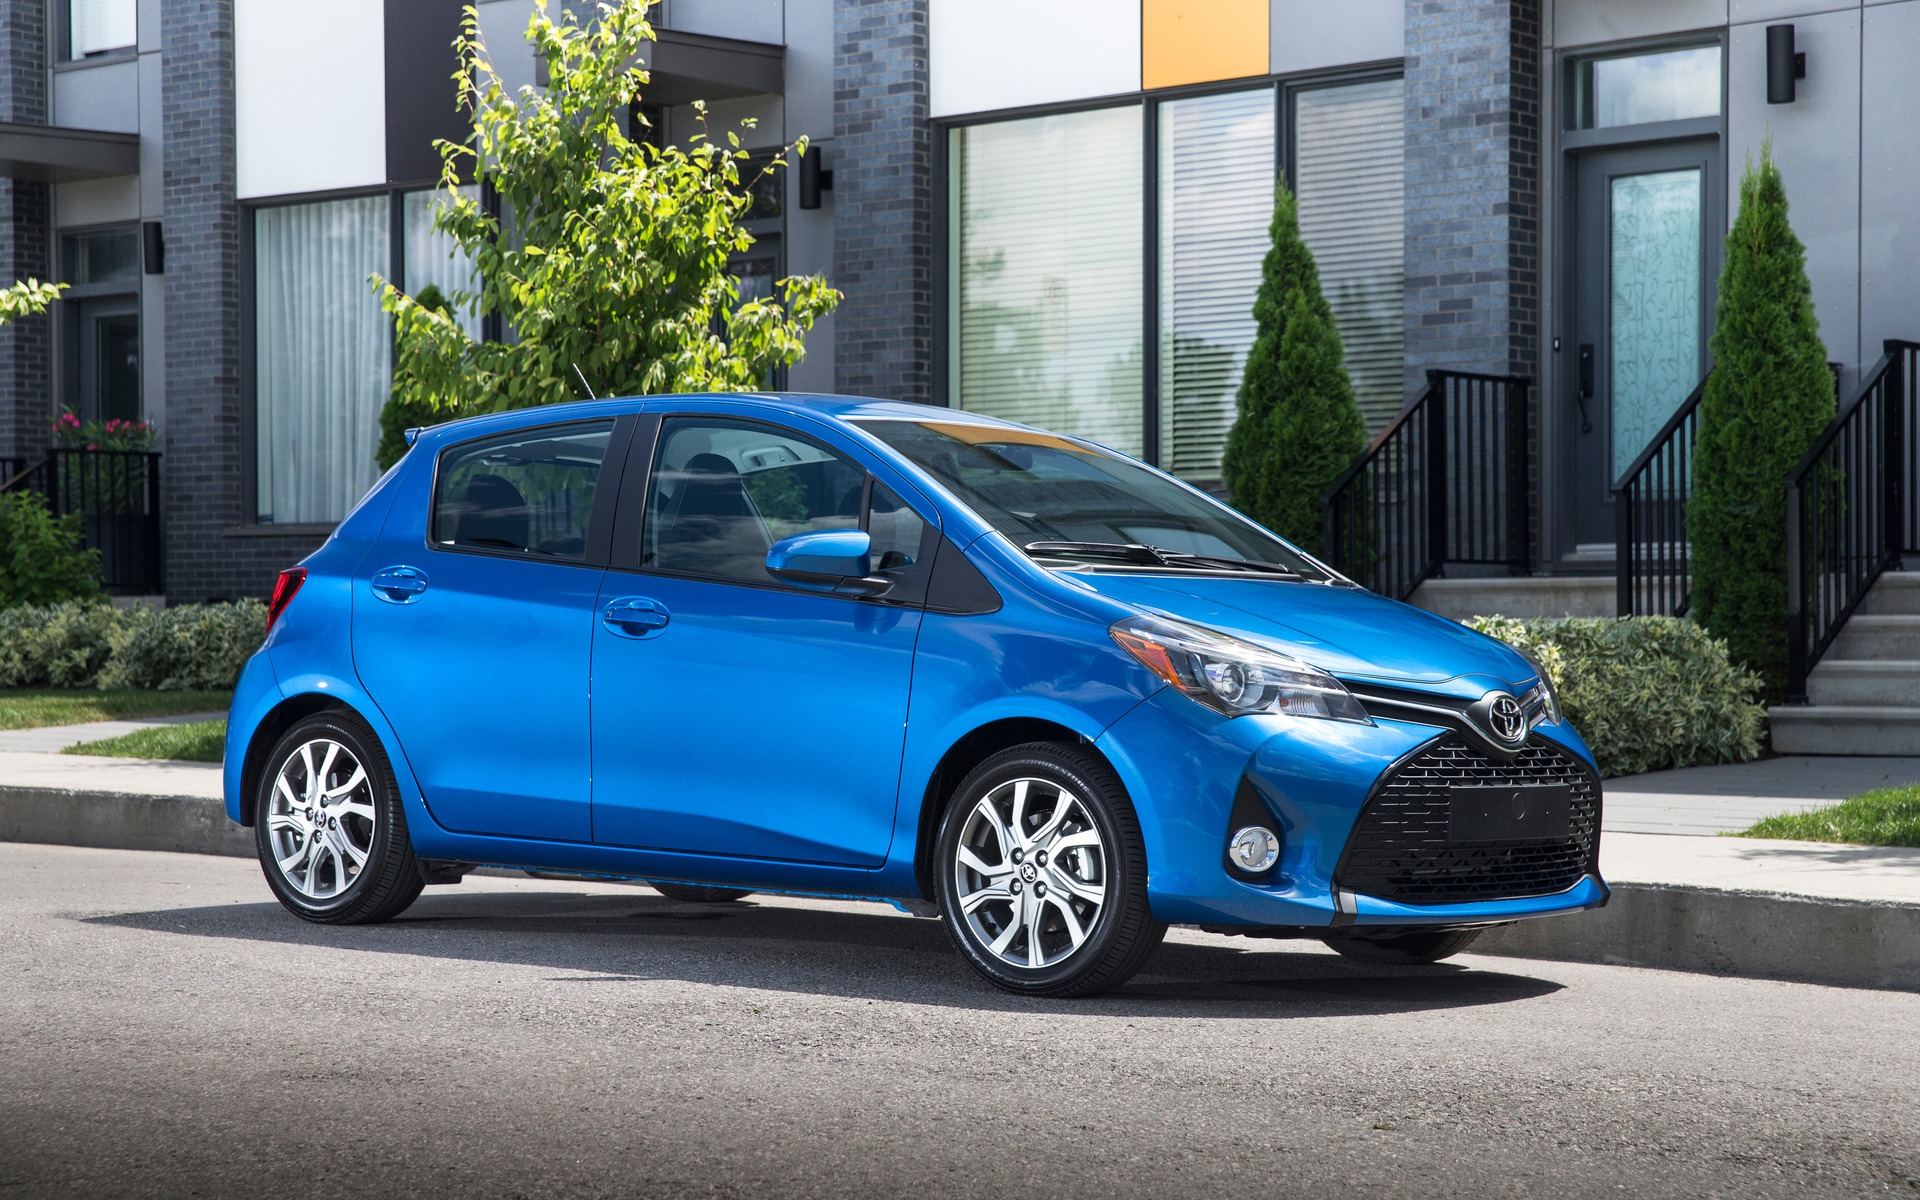 2015 Toyota Yaris: It Ain't Easy Being a Sub-Compact - The Car Guide